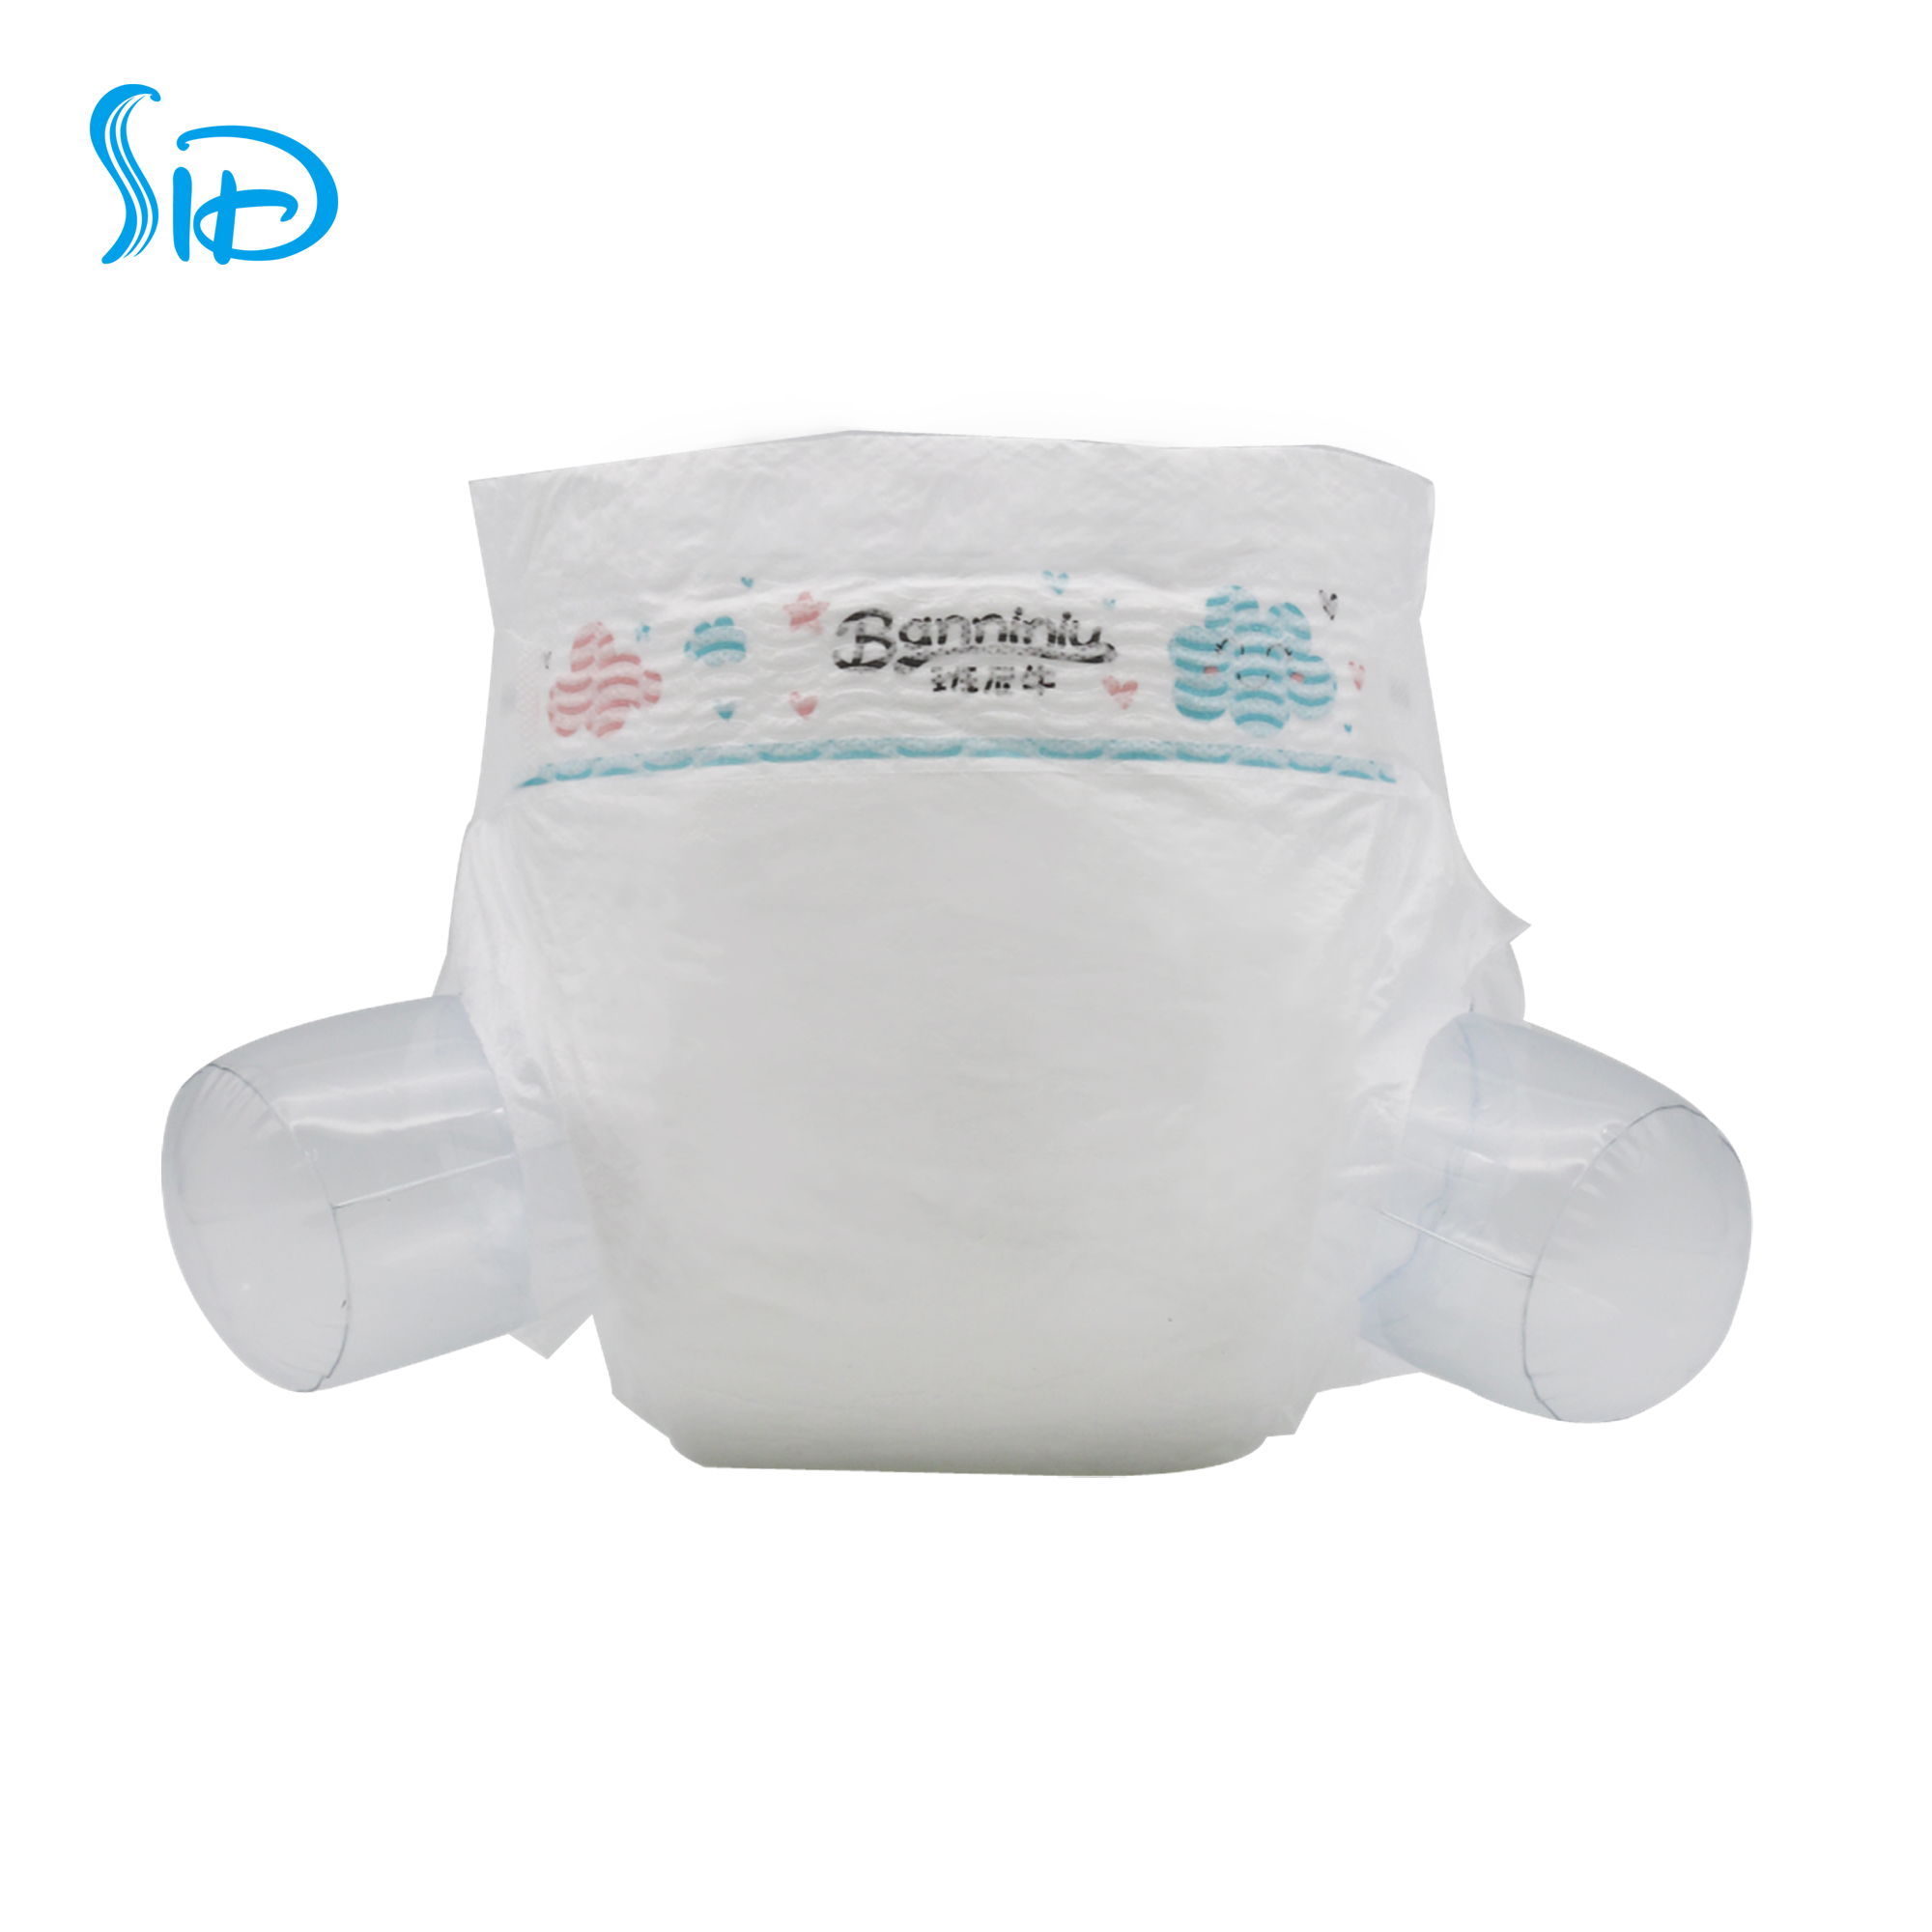  dry and clean Baby diapers baby diaper padsDisposable baby diaper